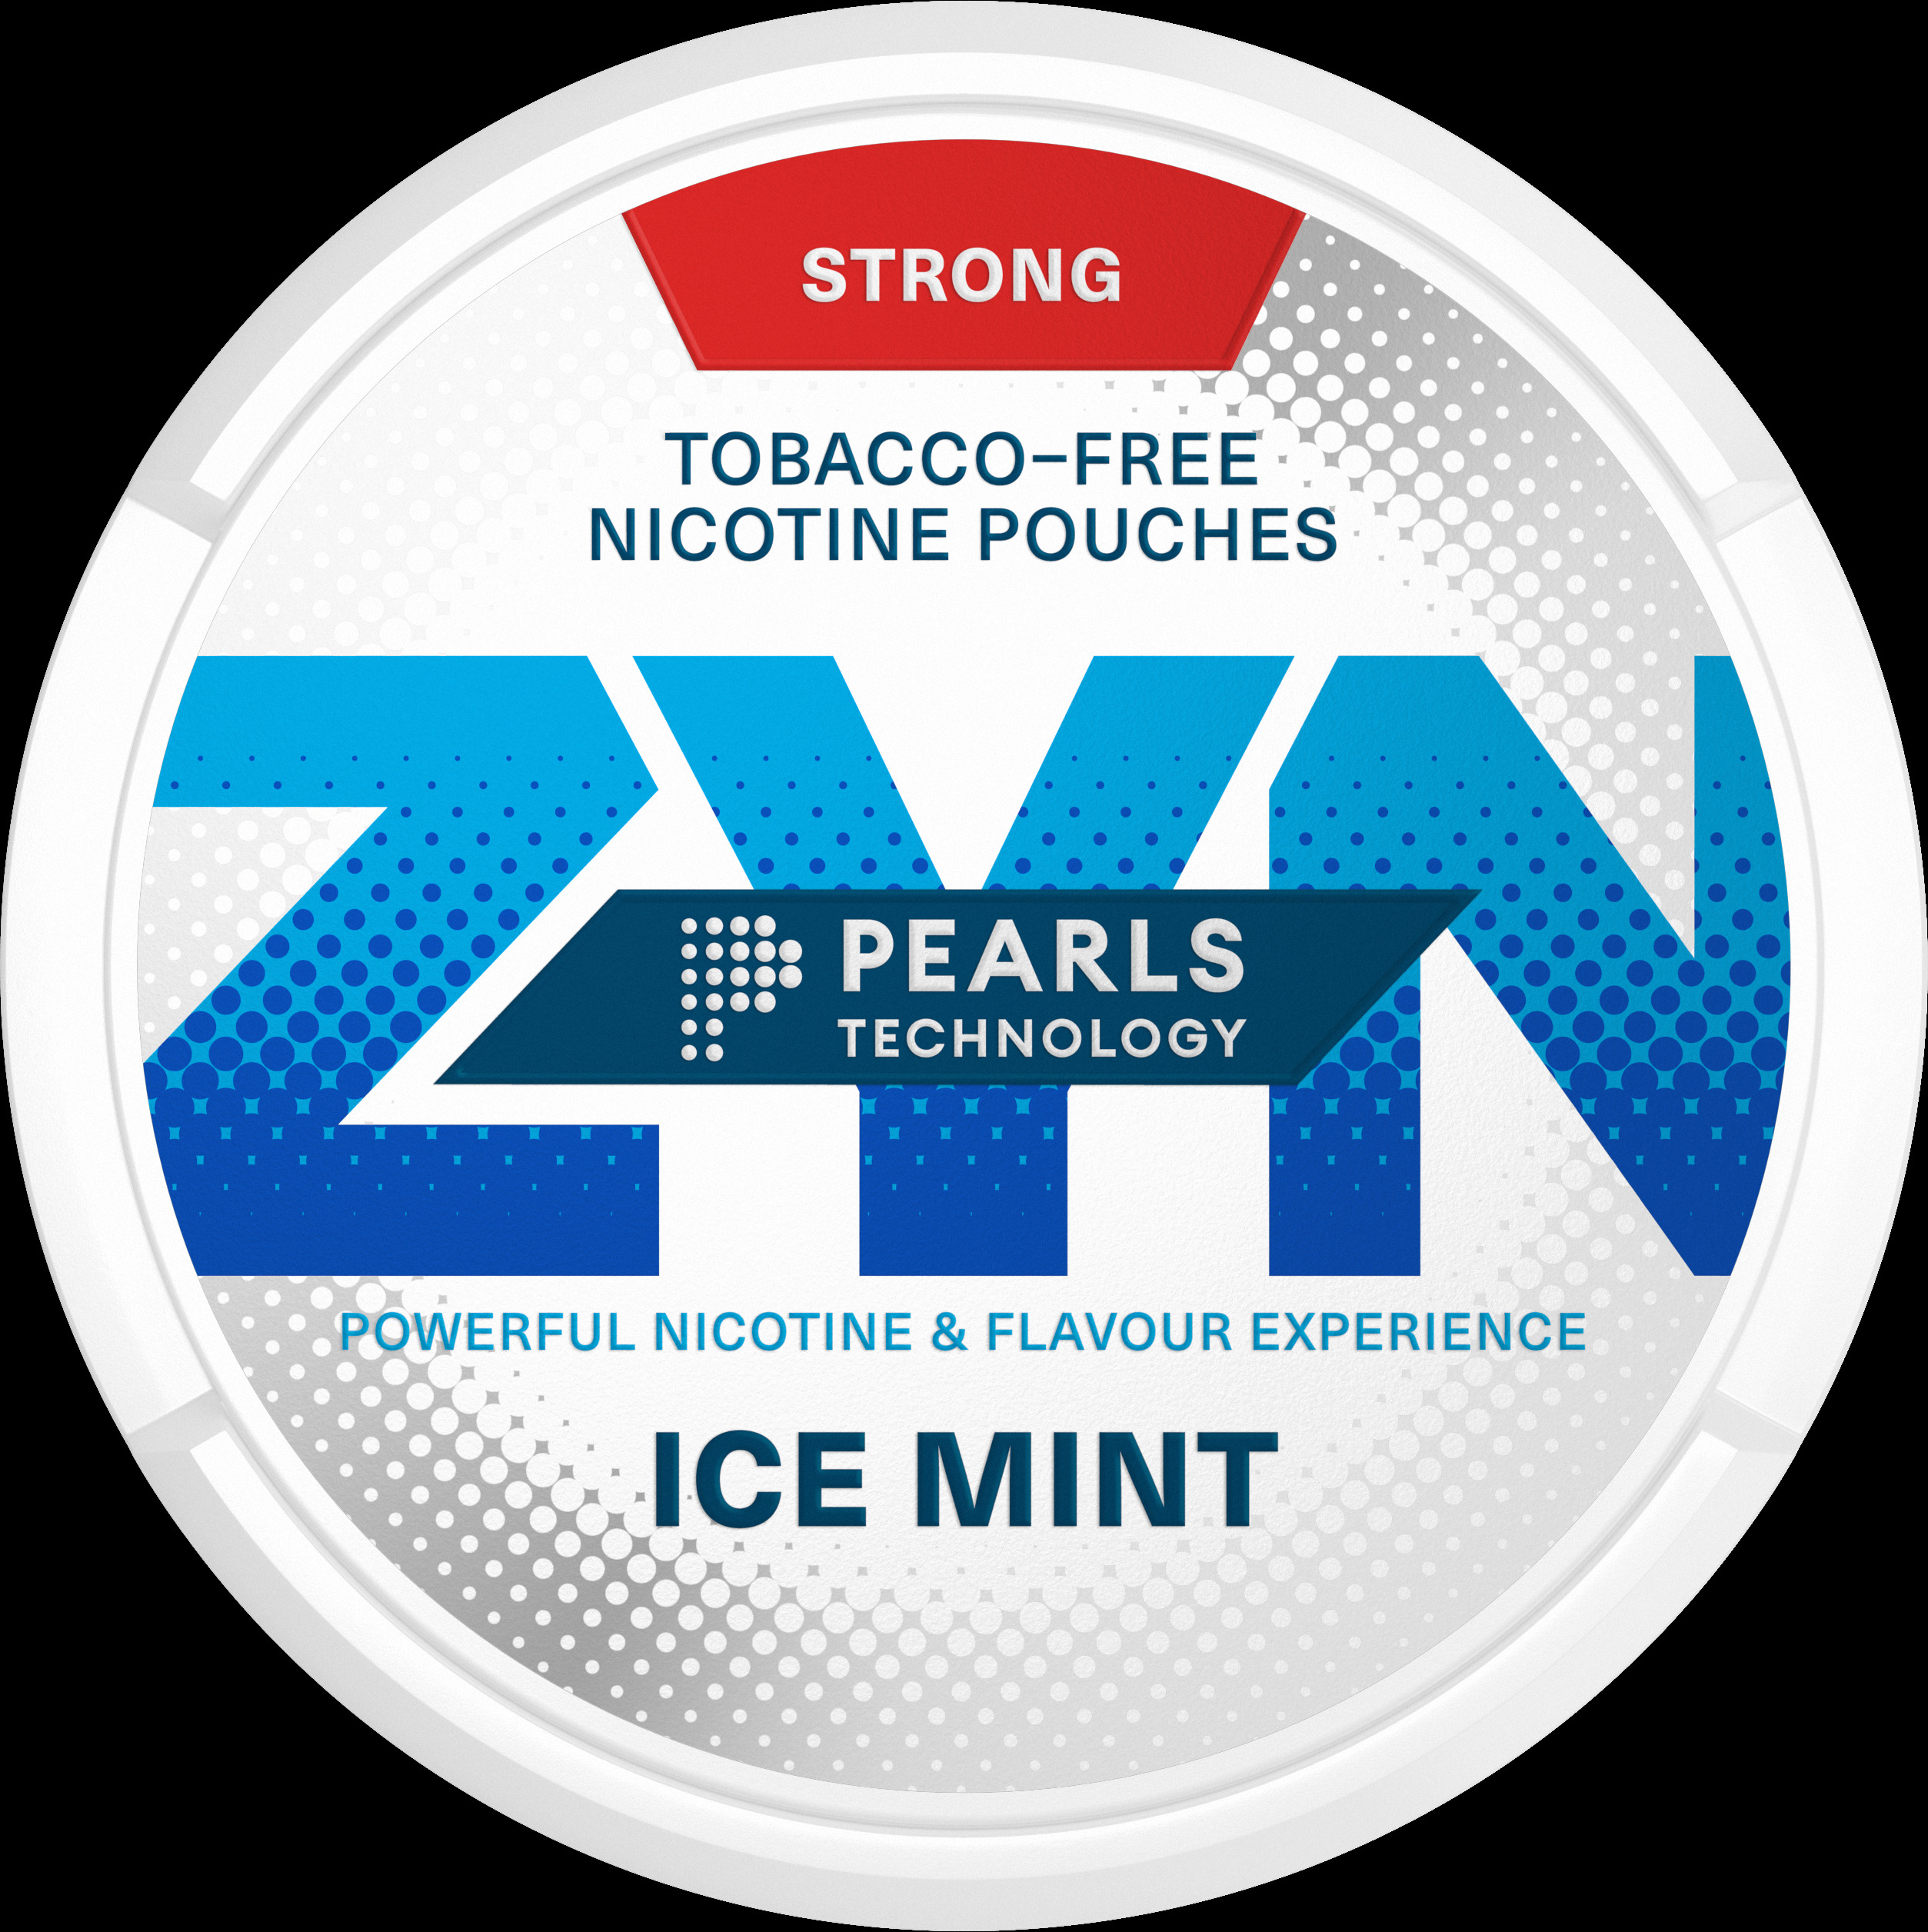 Zyn launches Pearls nicotine pouches